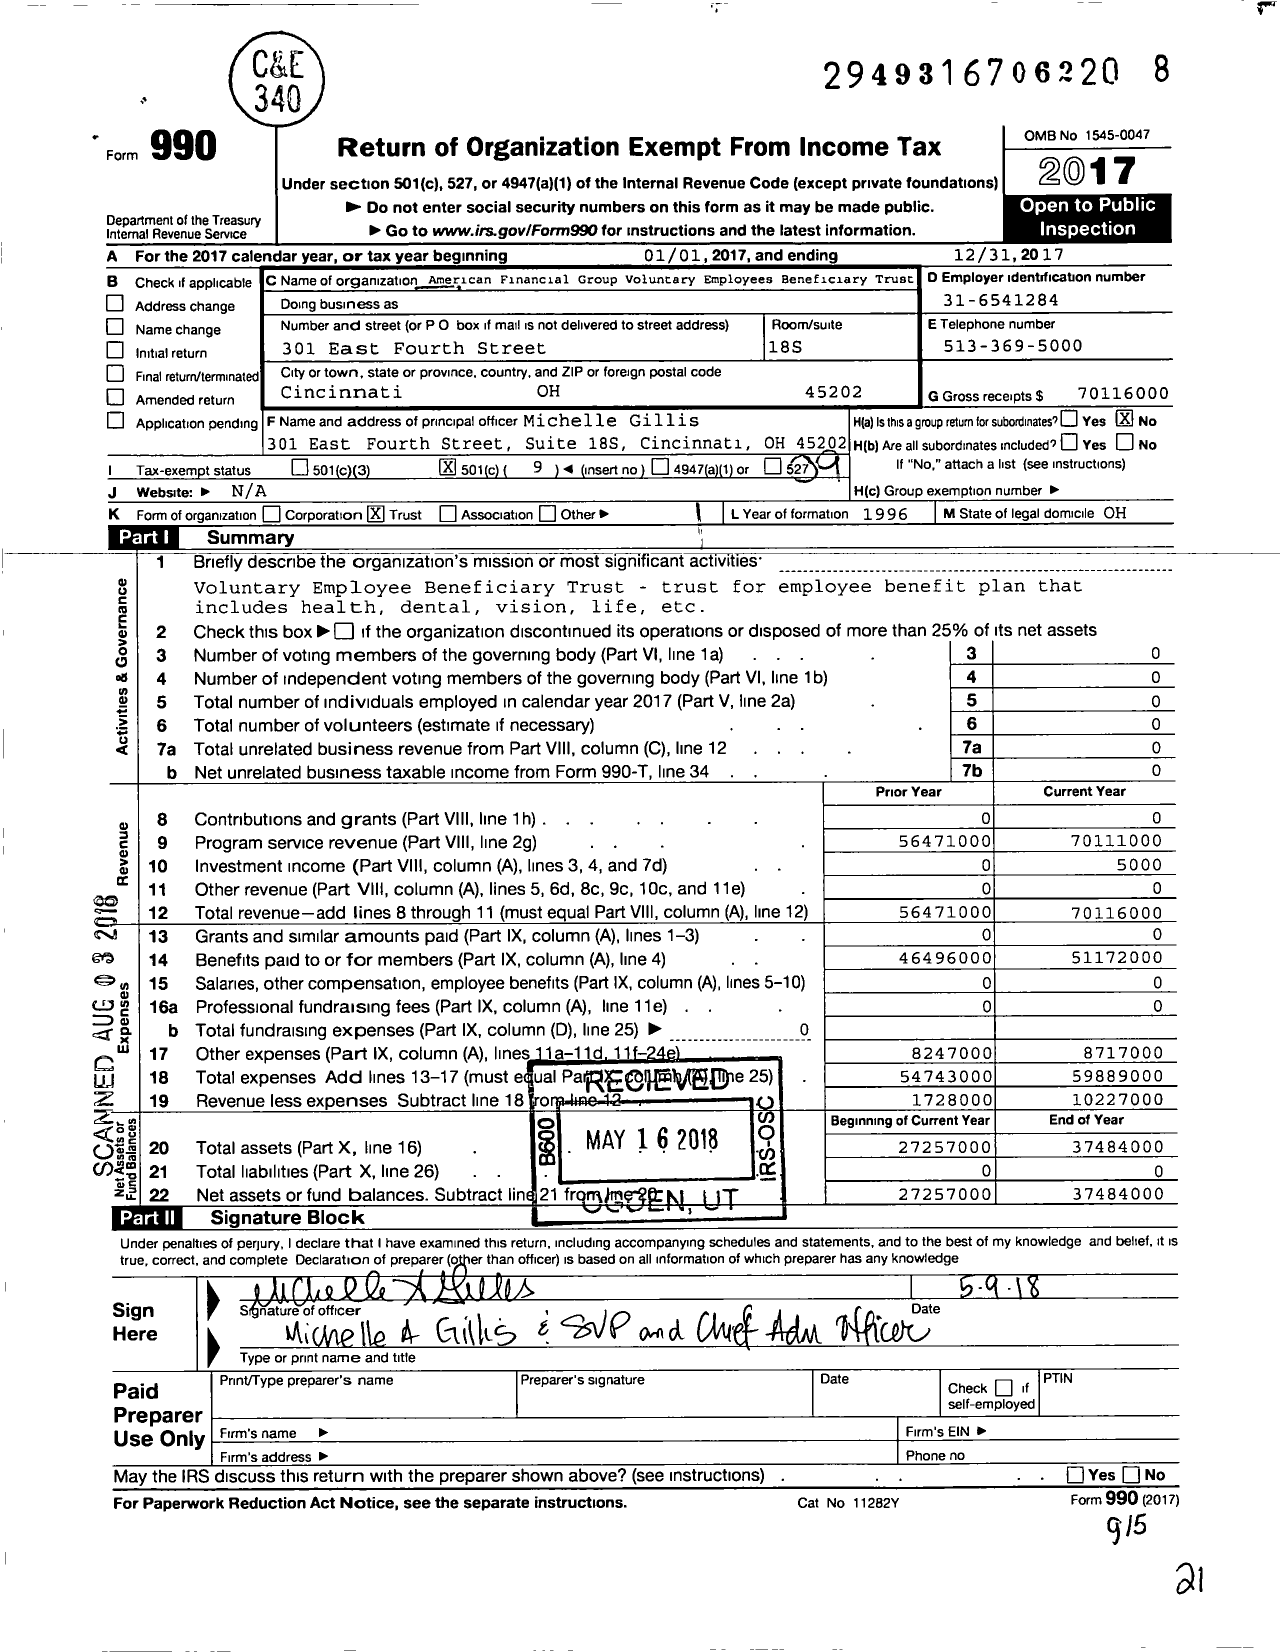 Image of first page of 2017 Form 990O for American Financial Group Voluntary Employees Beneficiary Trust